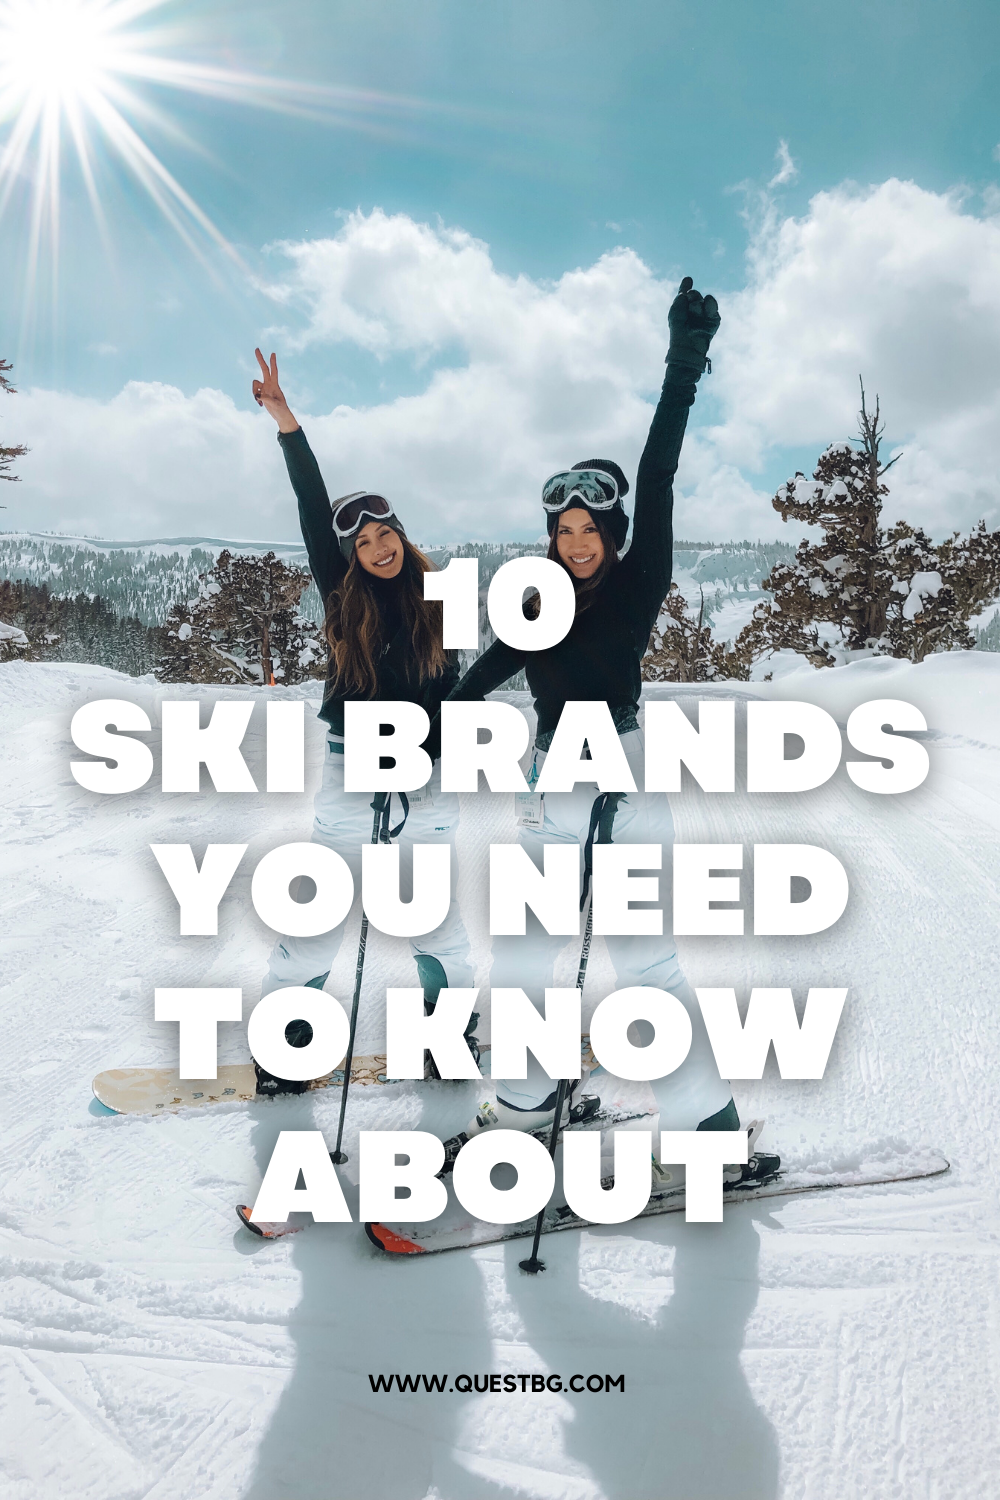 10 Ski Brands You Need to Know About